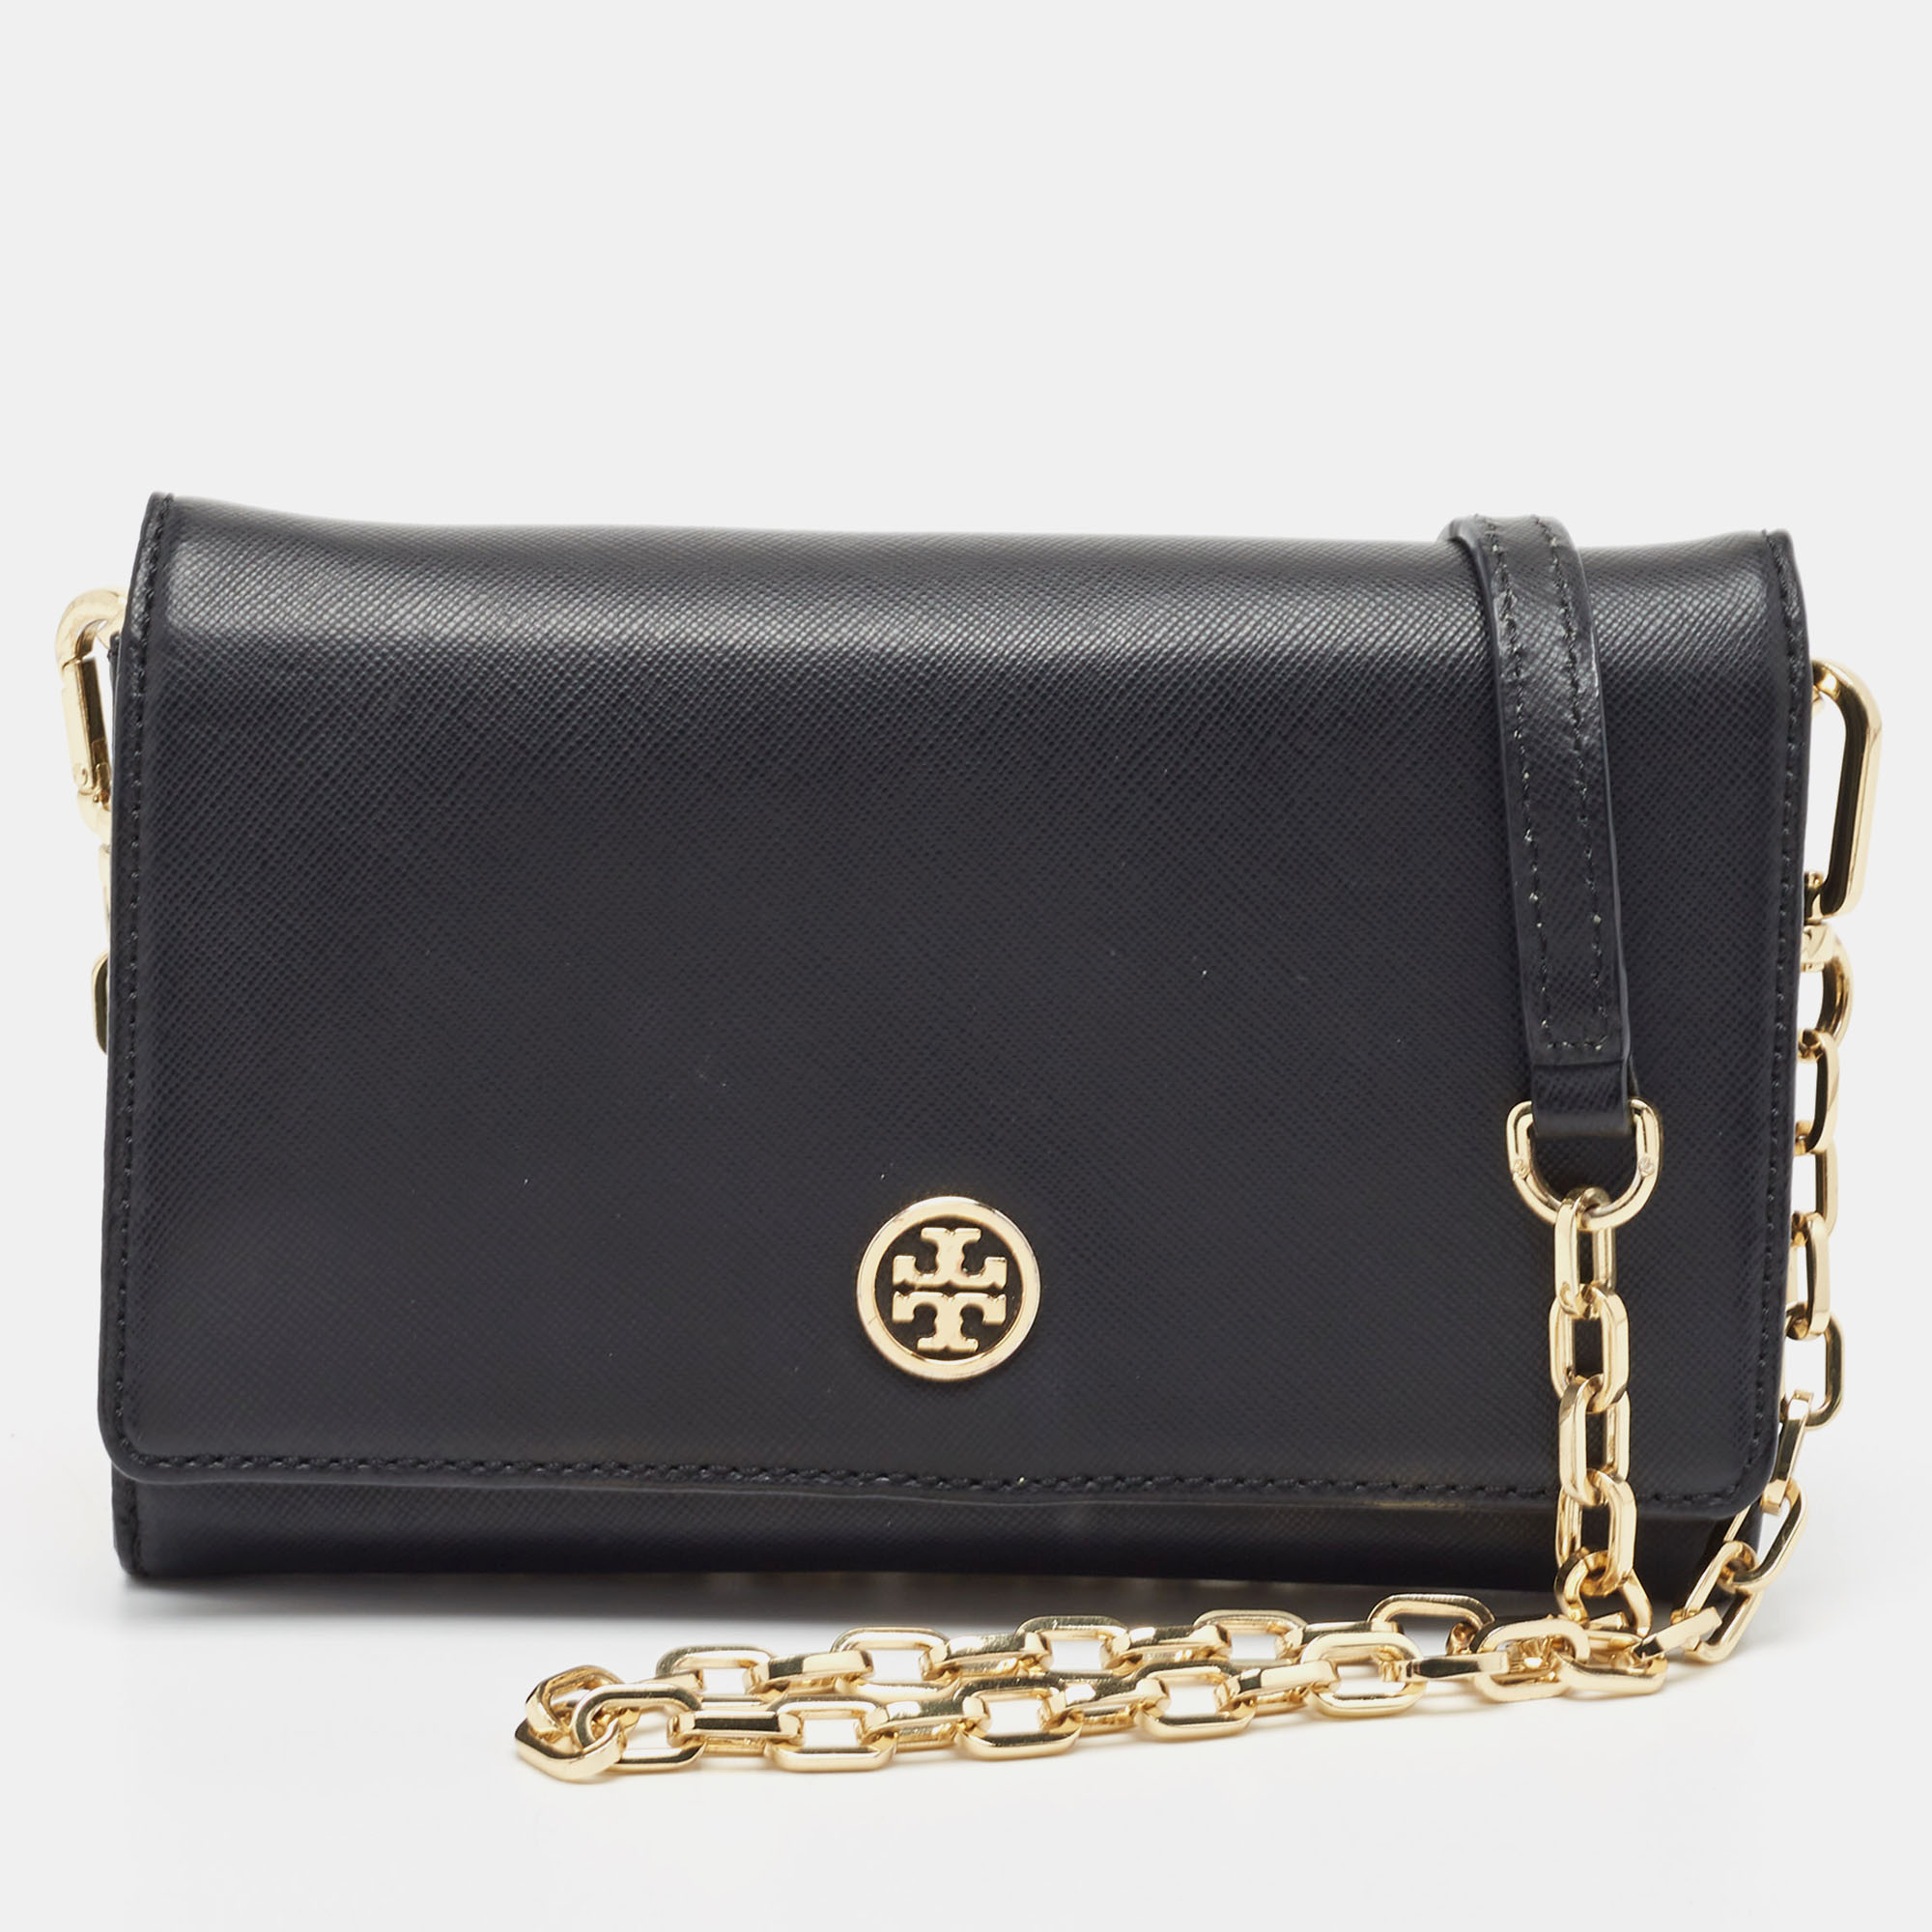 Pre-owned Tory Burch Black Leather Robinson Chain Clutch Bag